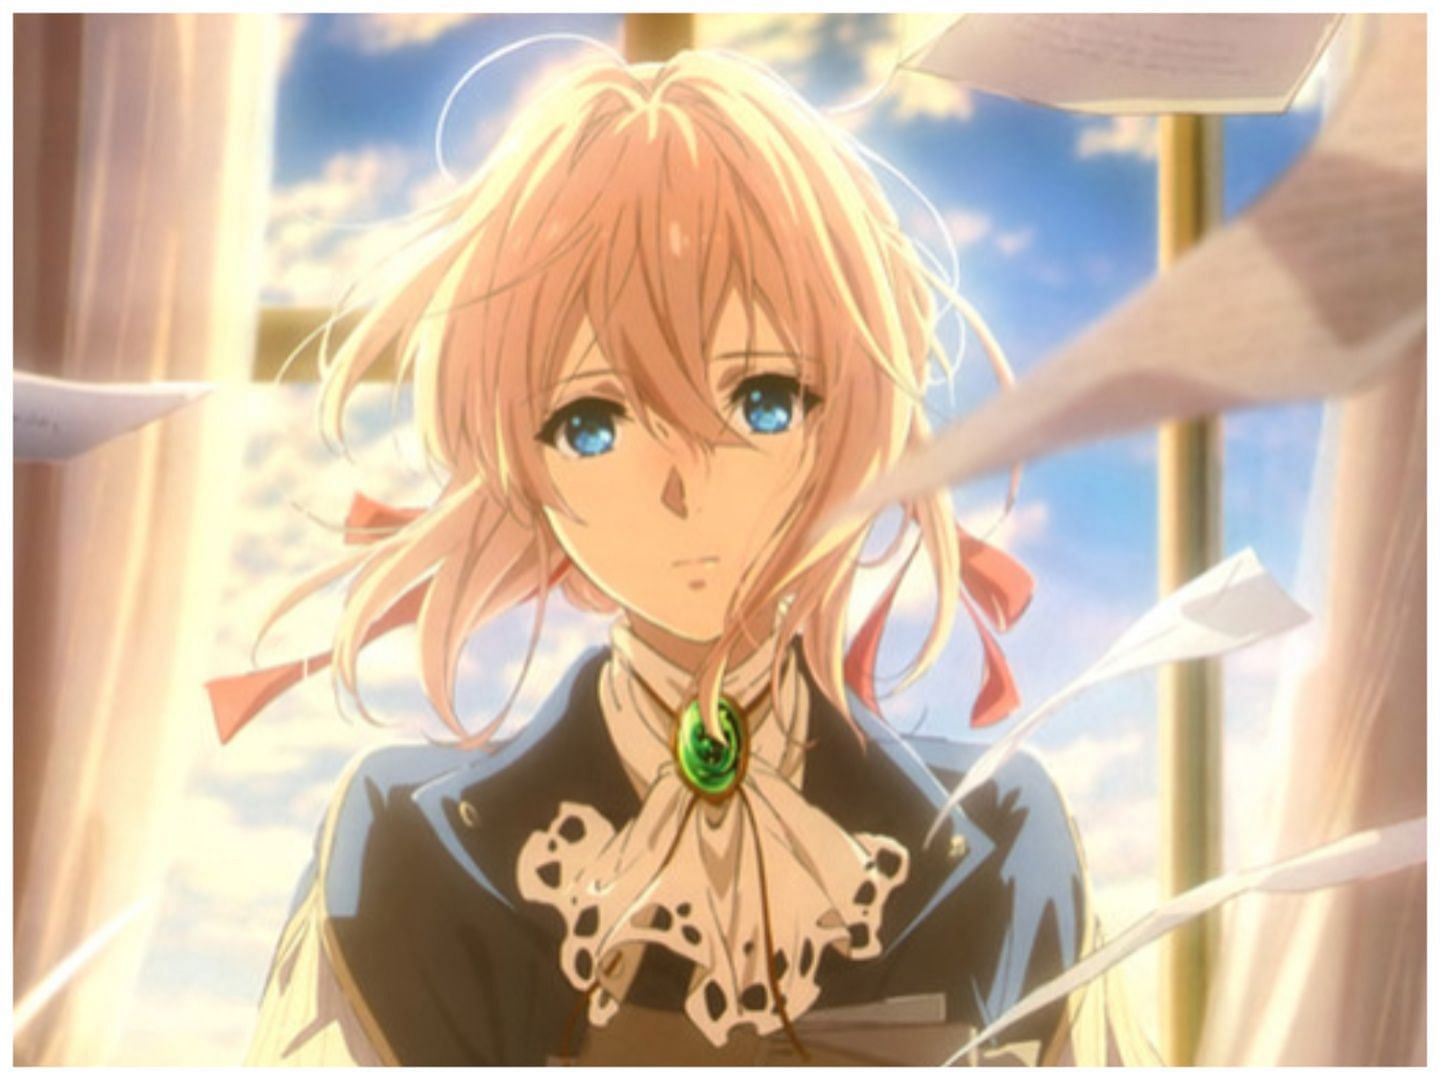 Another manga written by women - Violet Evergarden started as a light novel and was later adapted into an anime series. (Image via Kyoto Animation)